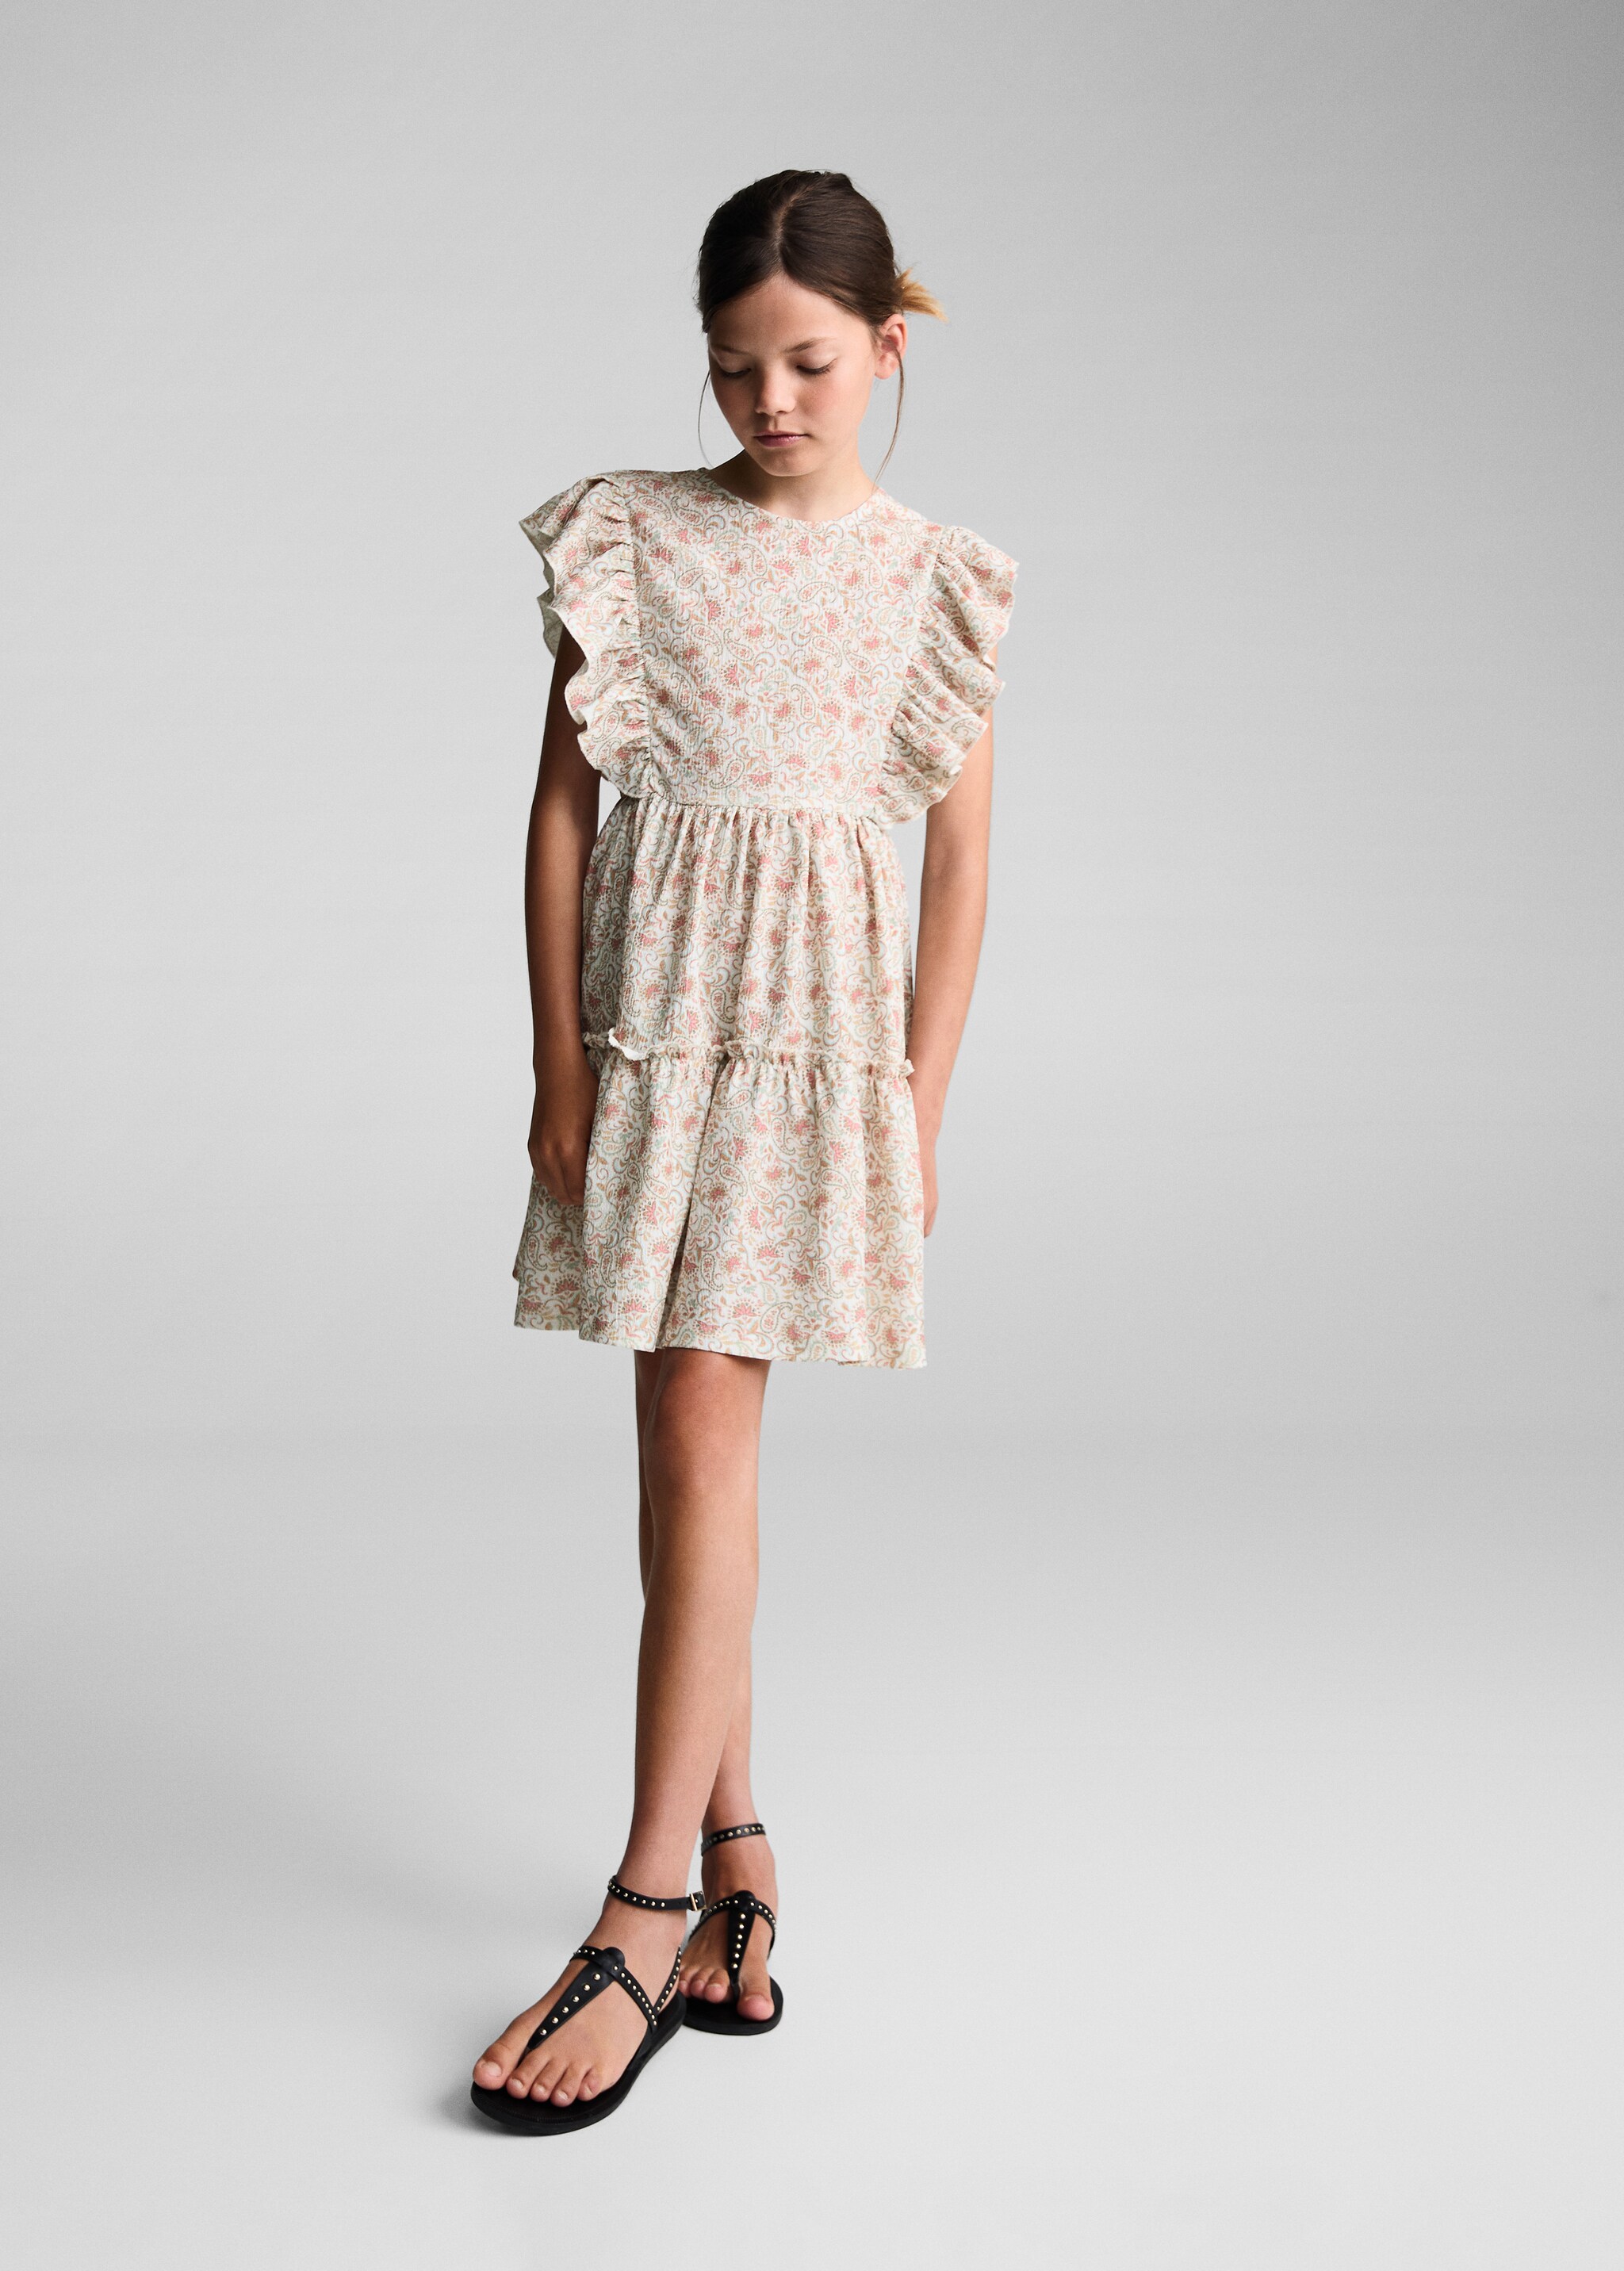 Paisley dress with ruffles - General plane